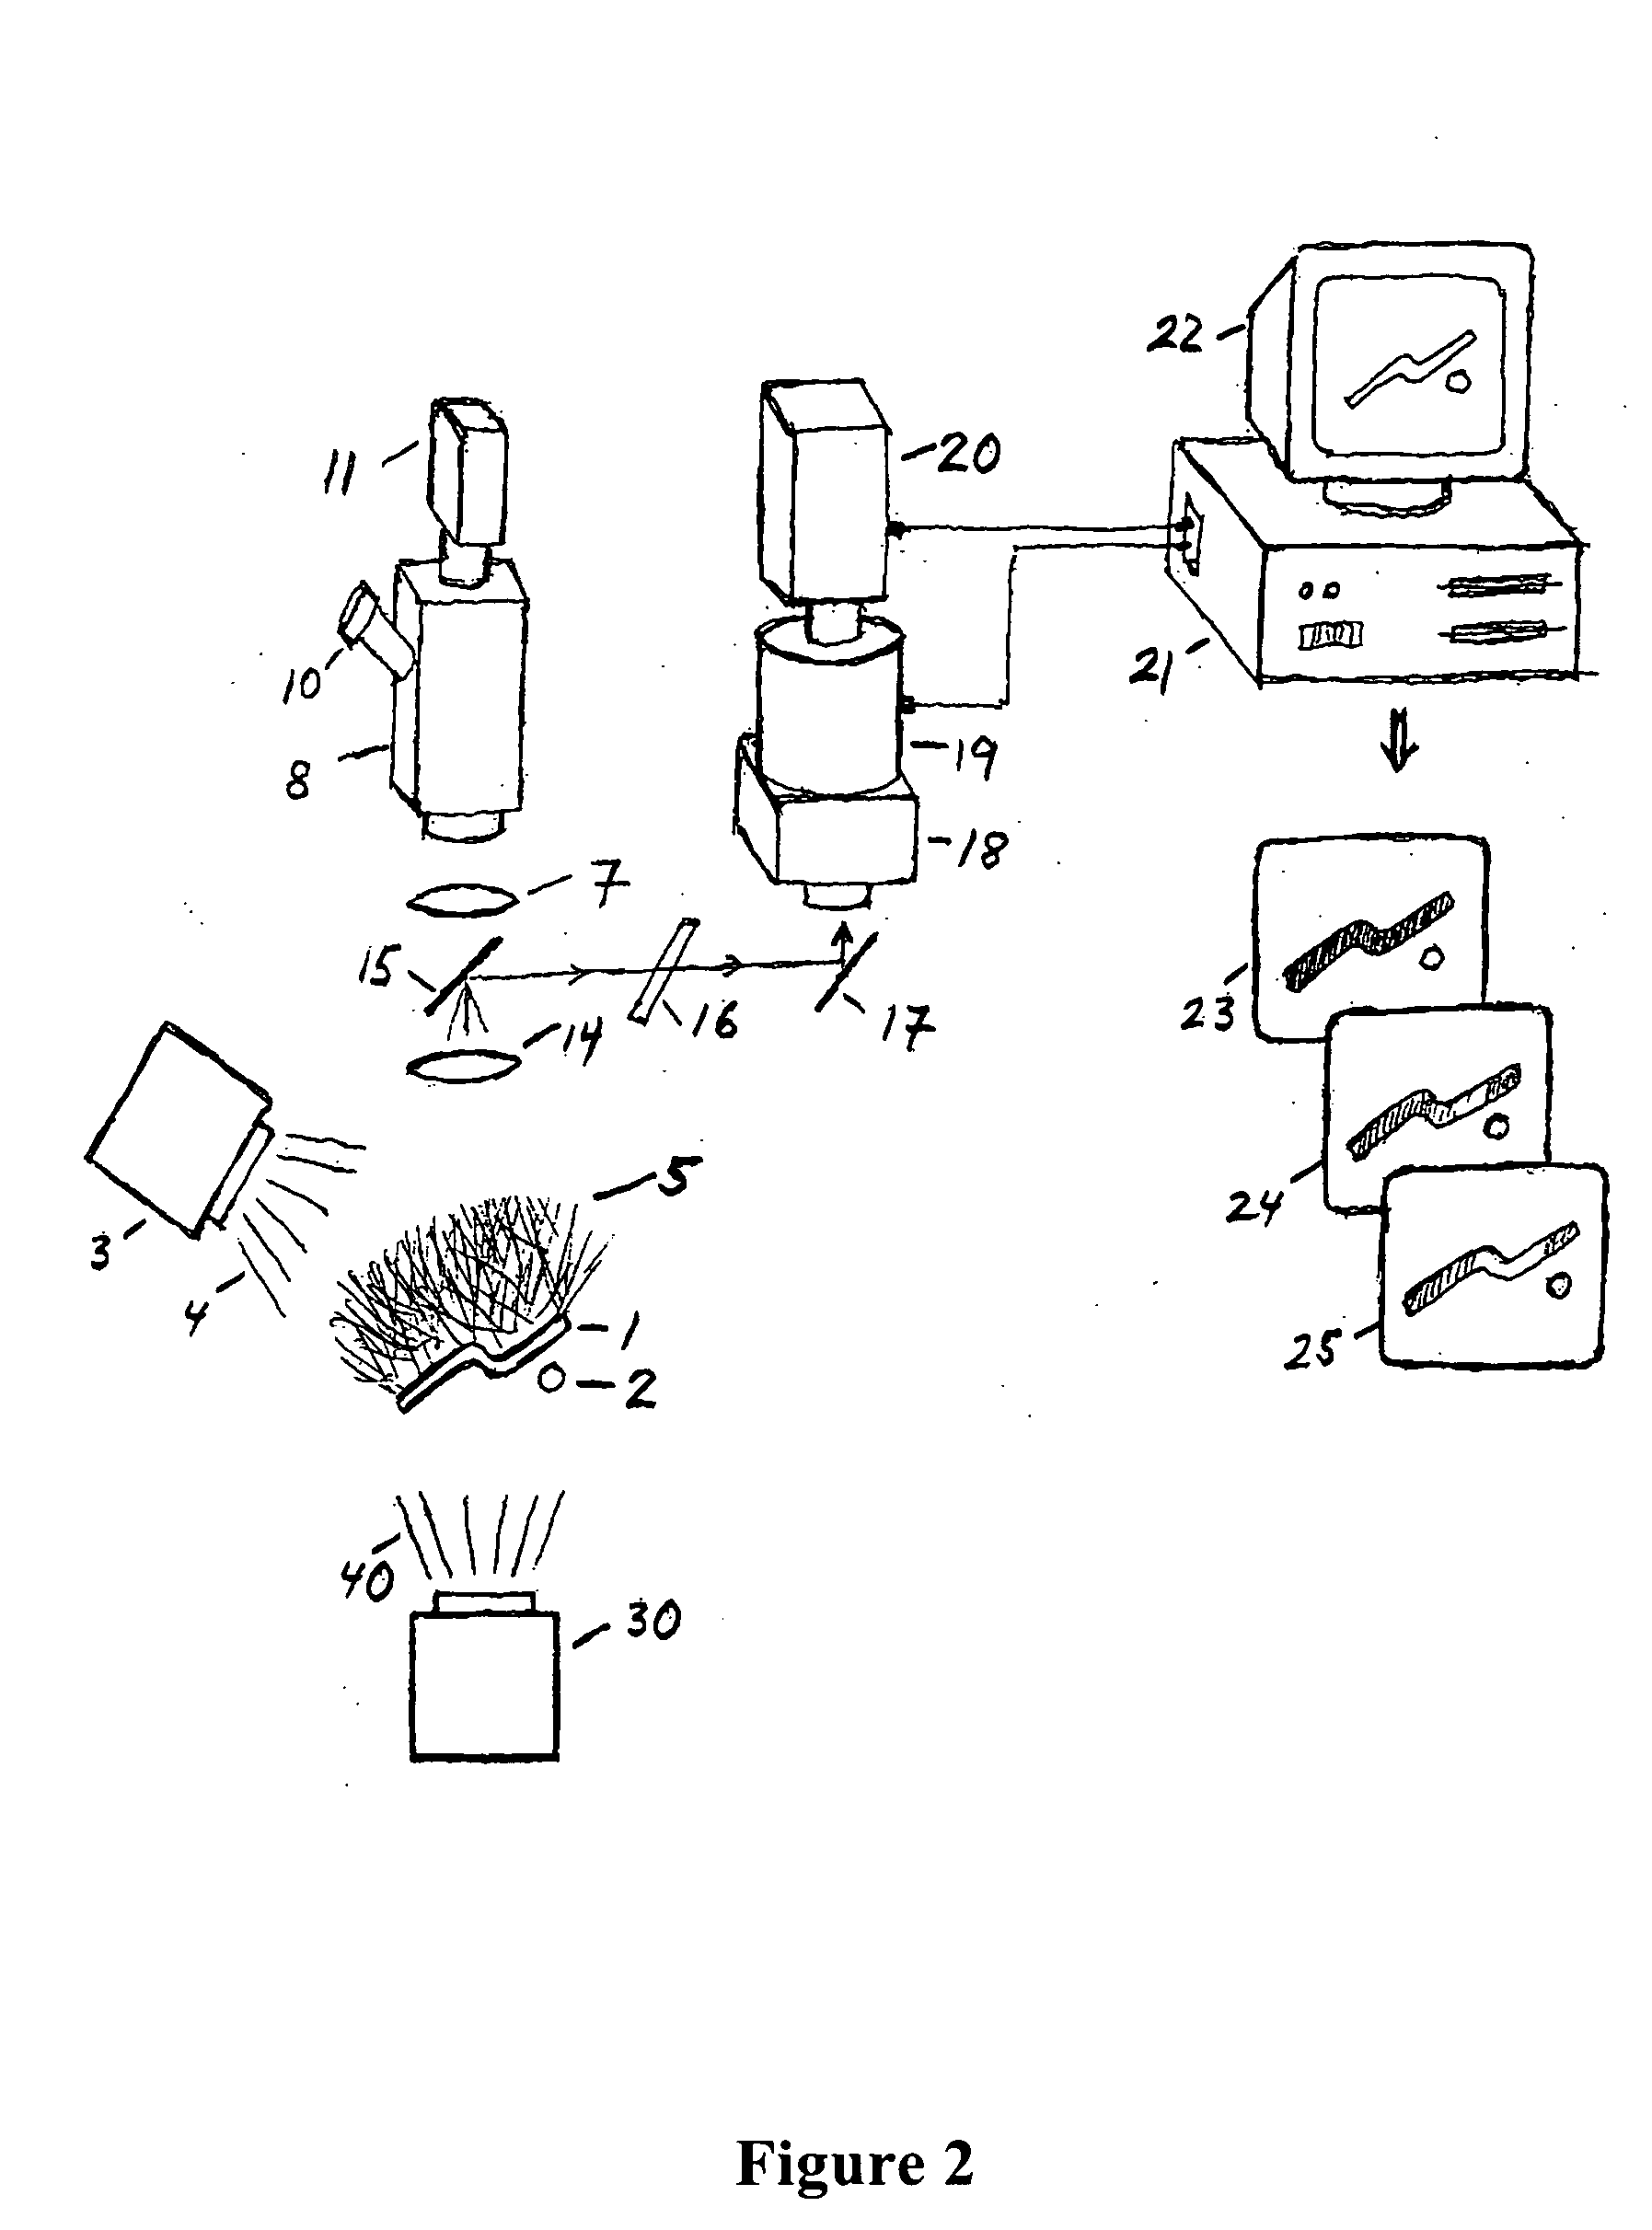 Apparatus and method for improved forensic detection